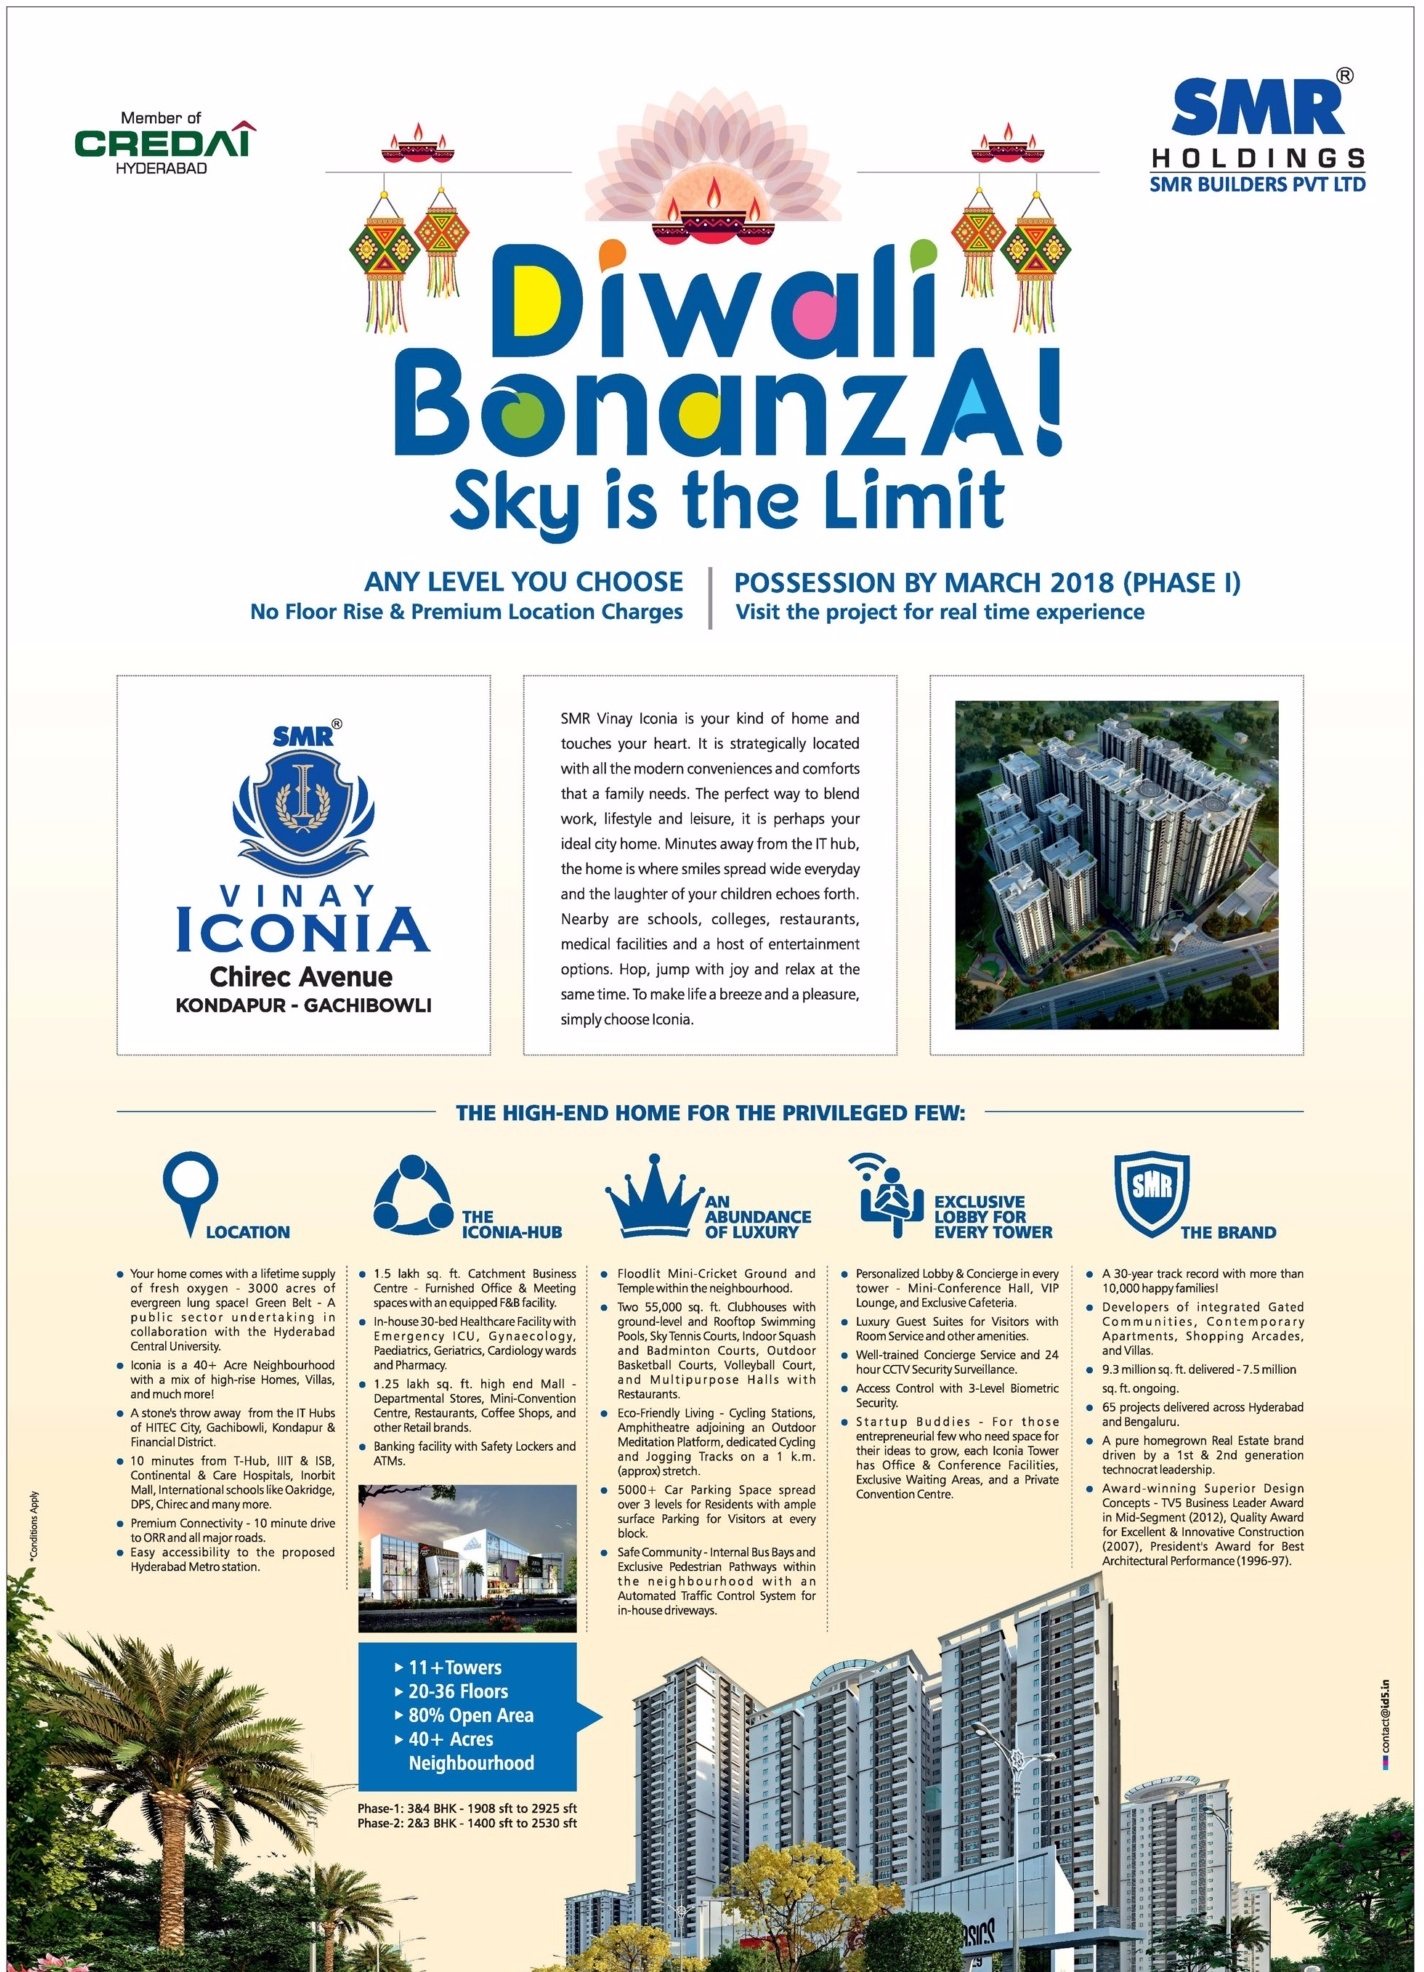 Sky is the limit during Diwali Bonanza Offer at SMR Vinay Iconia in Hyderabad Update